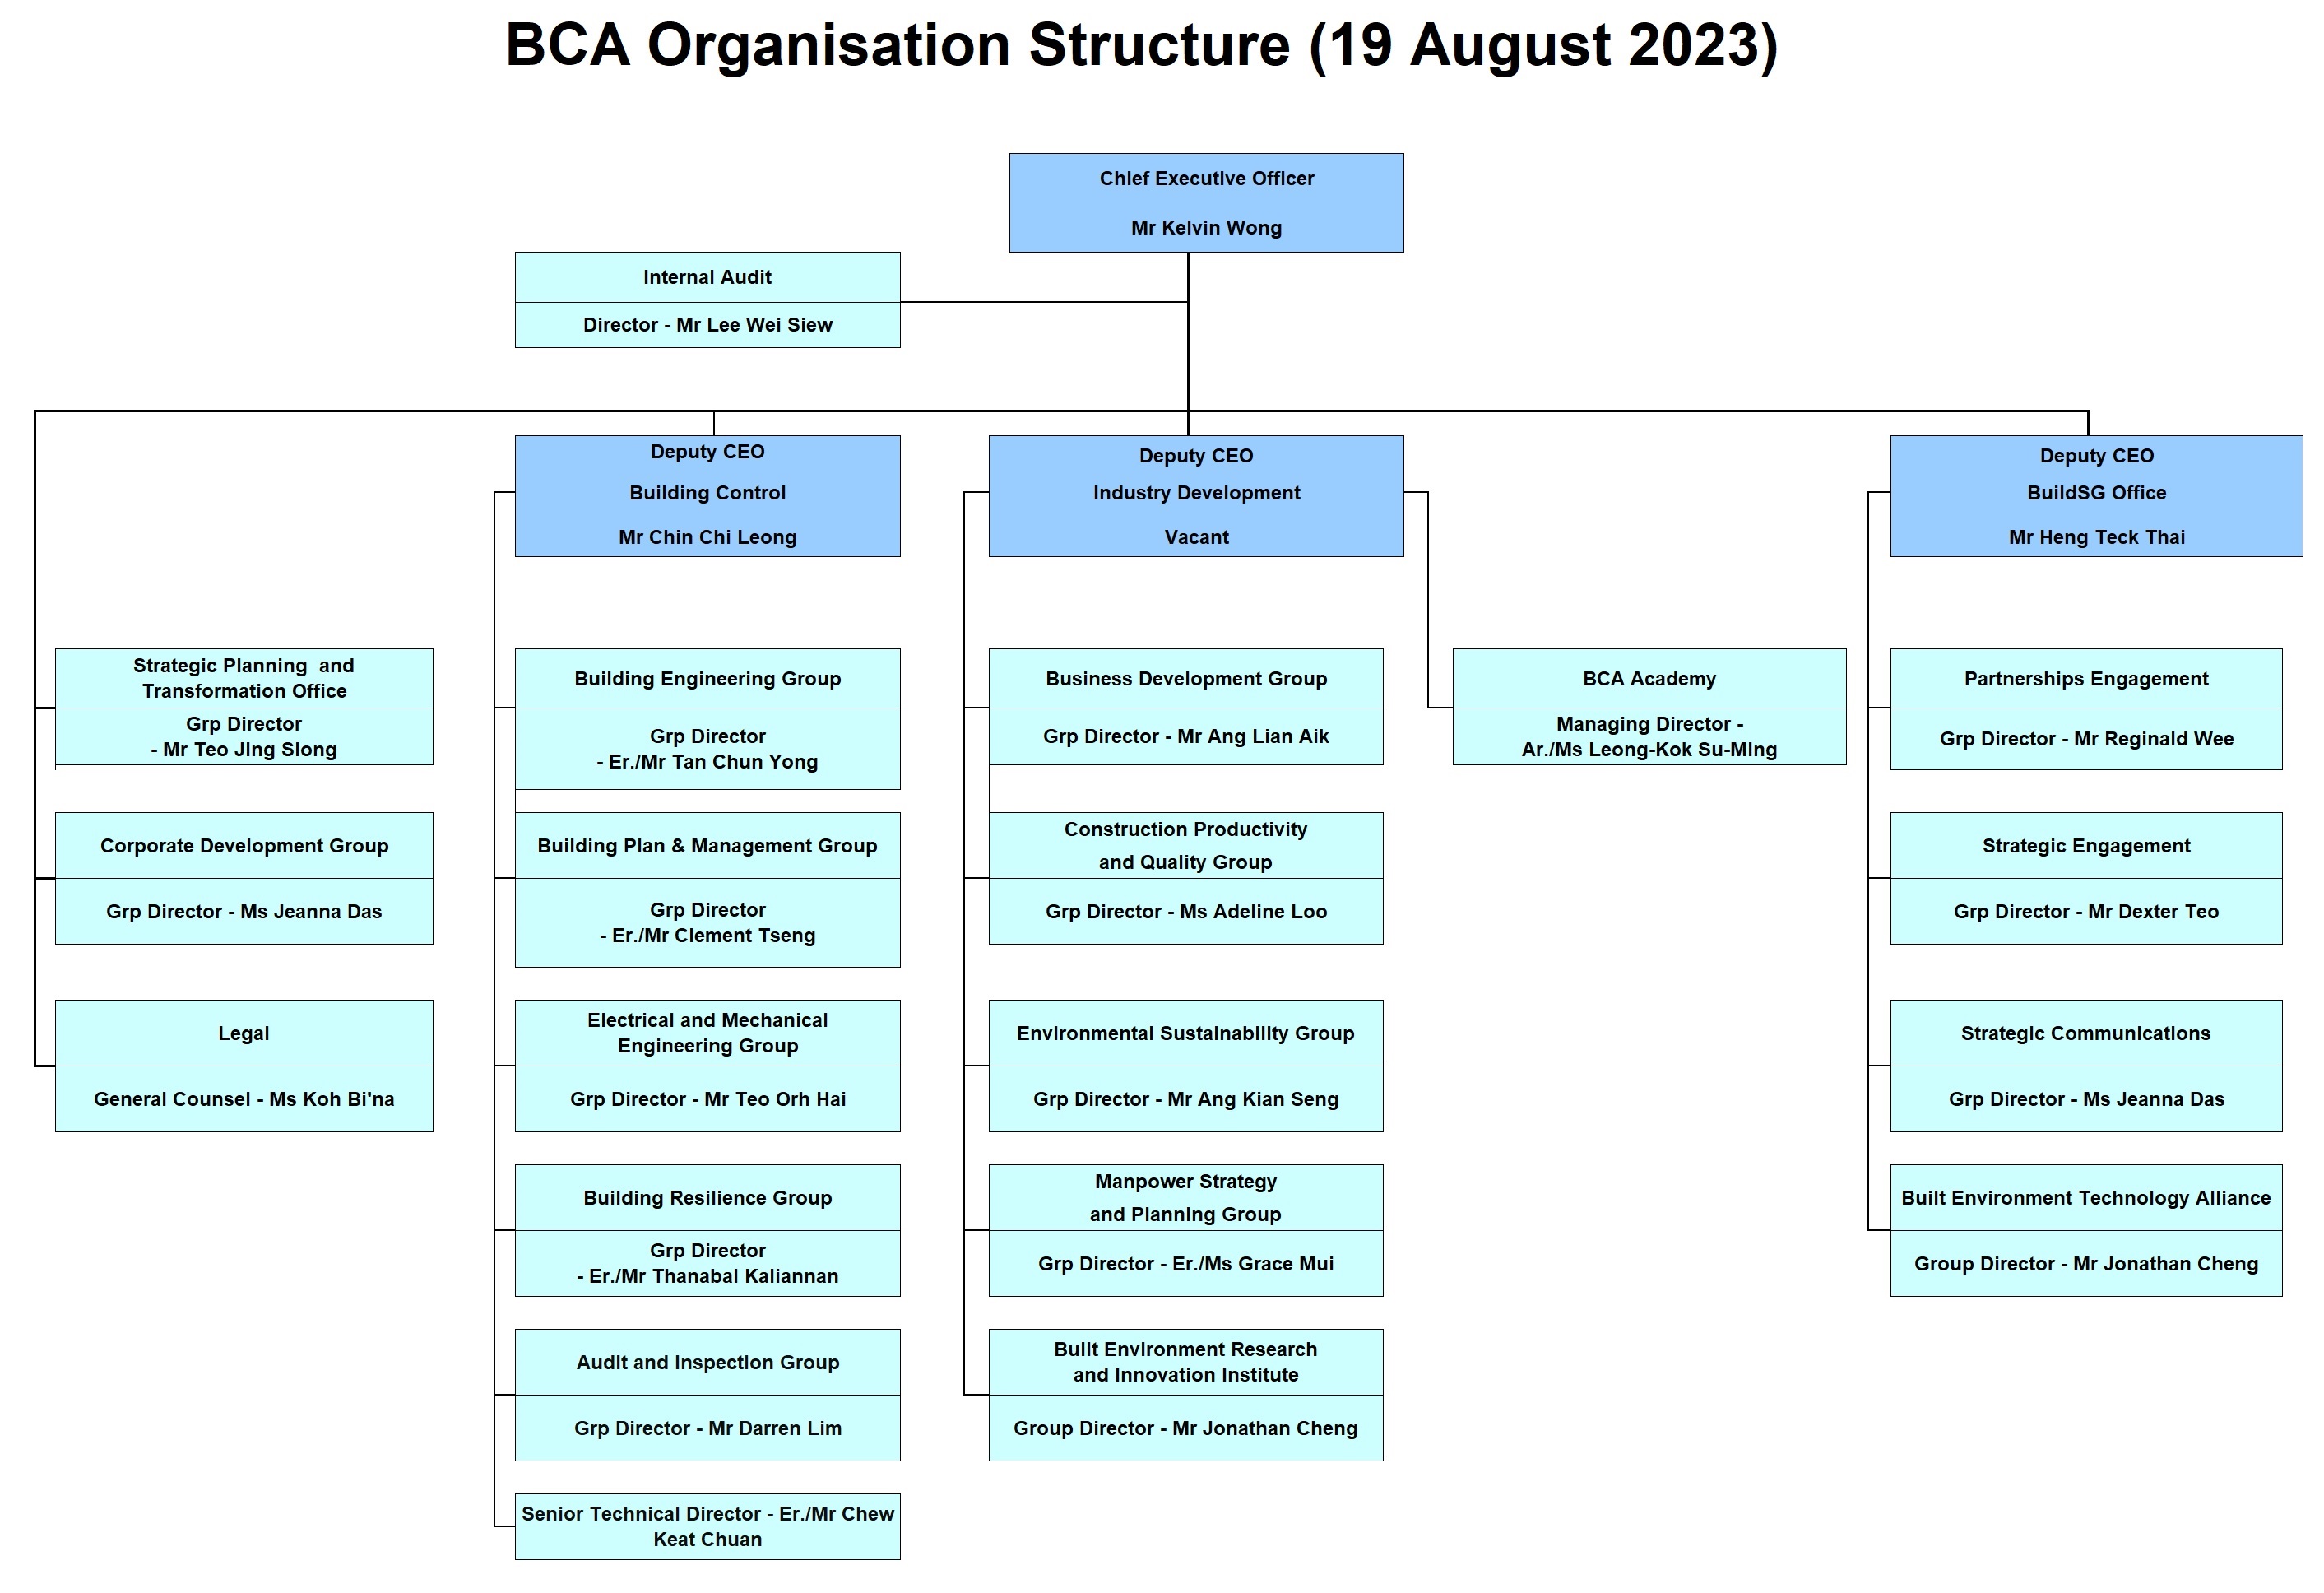 Board and Management | Building and Construction Authority (BCA)